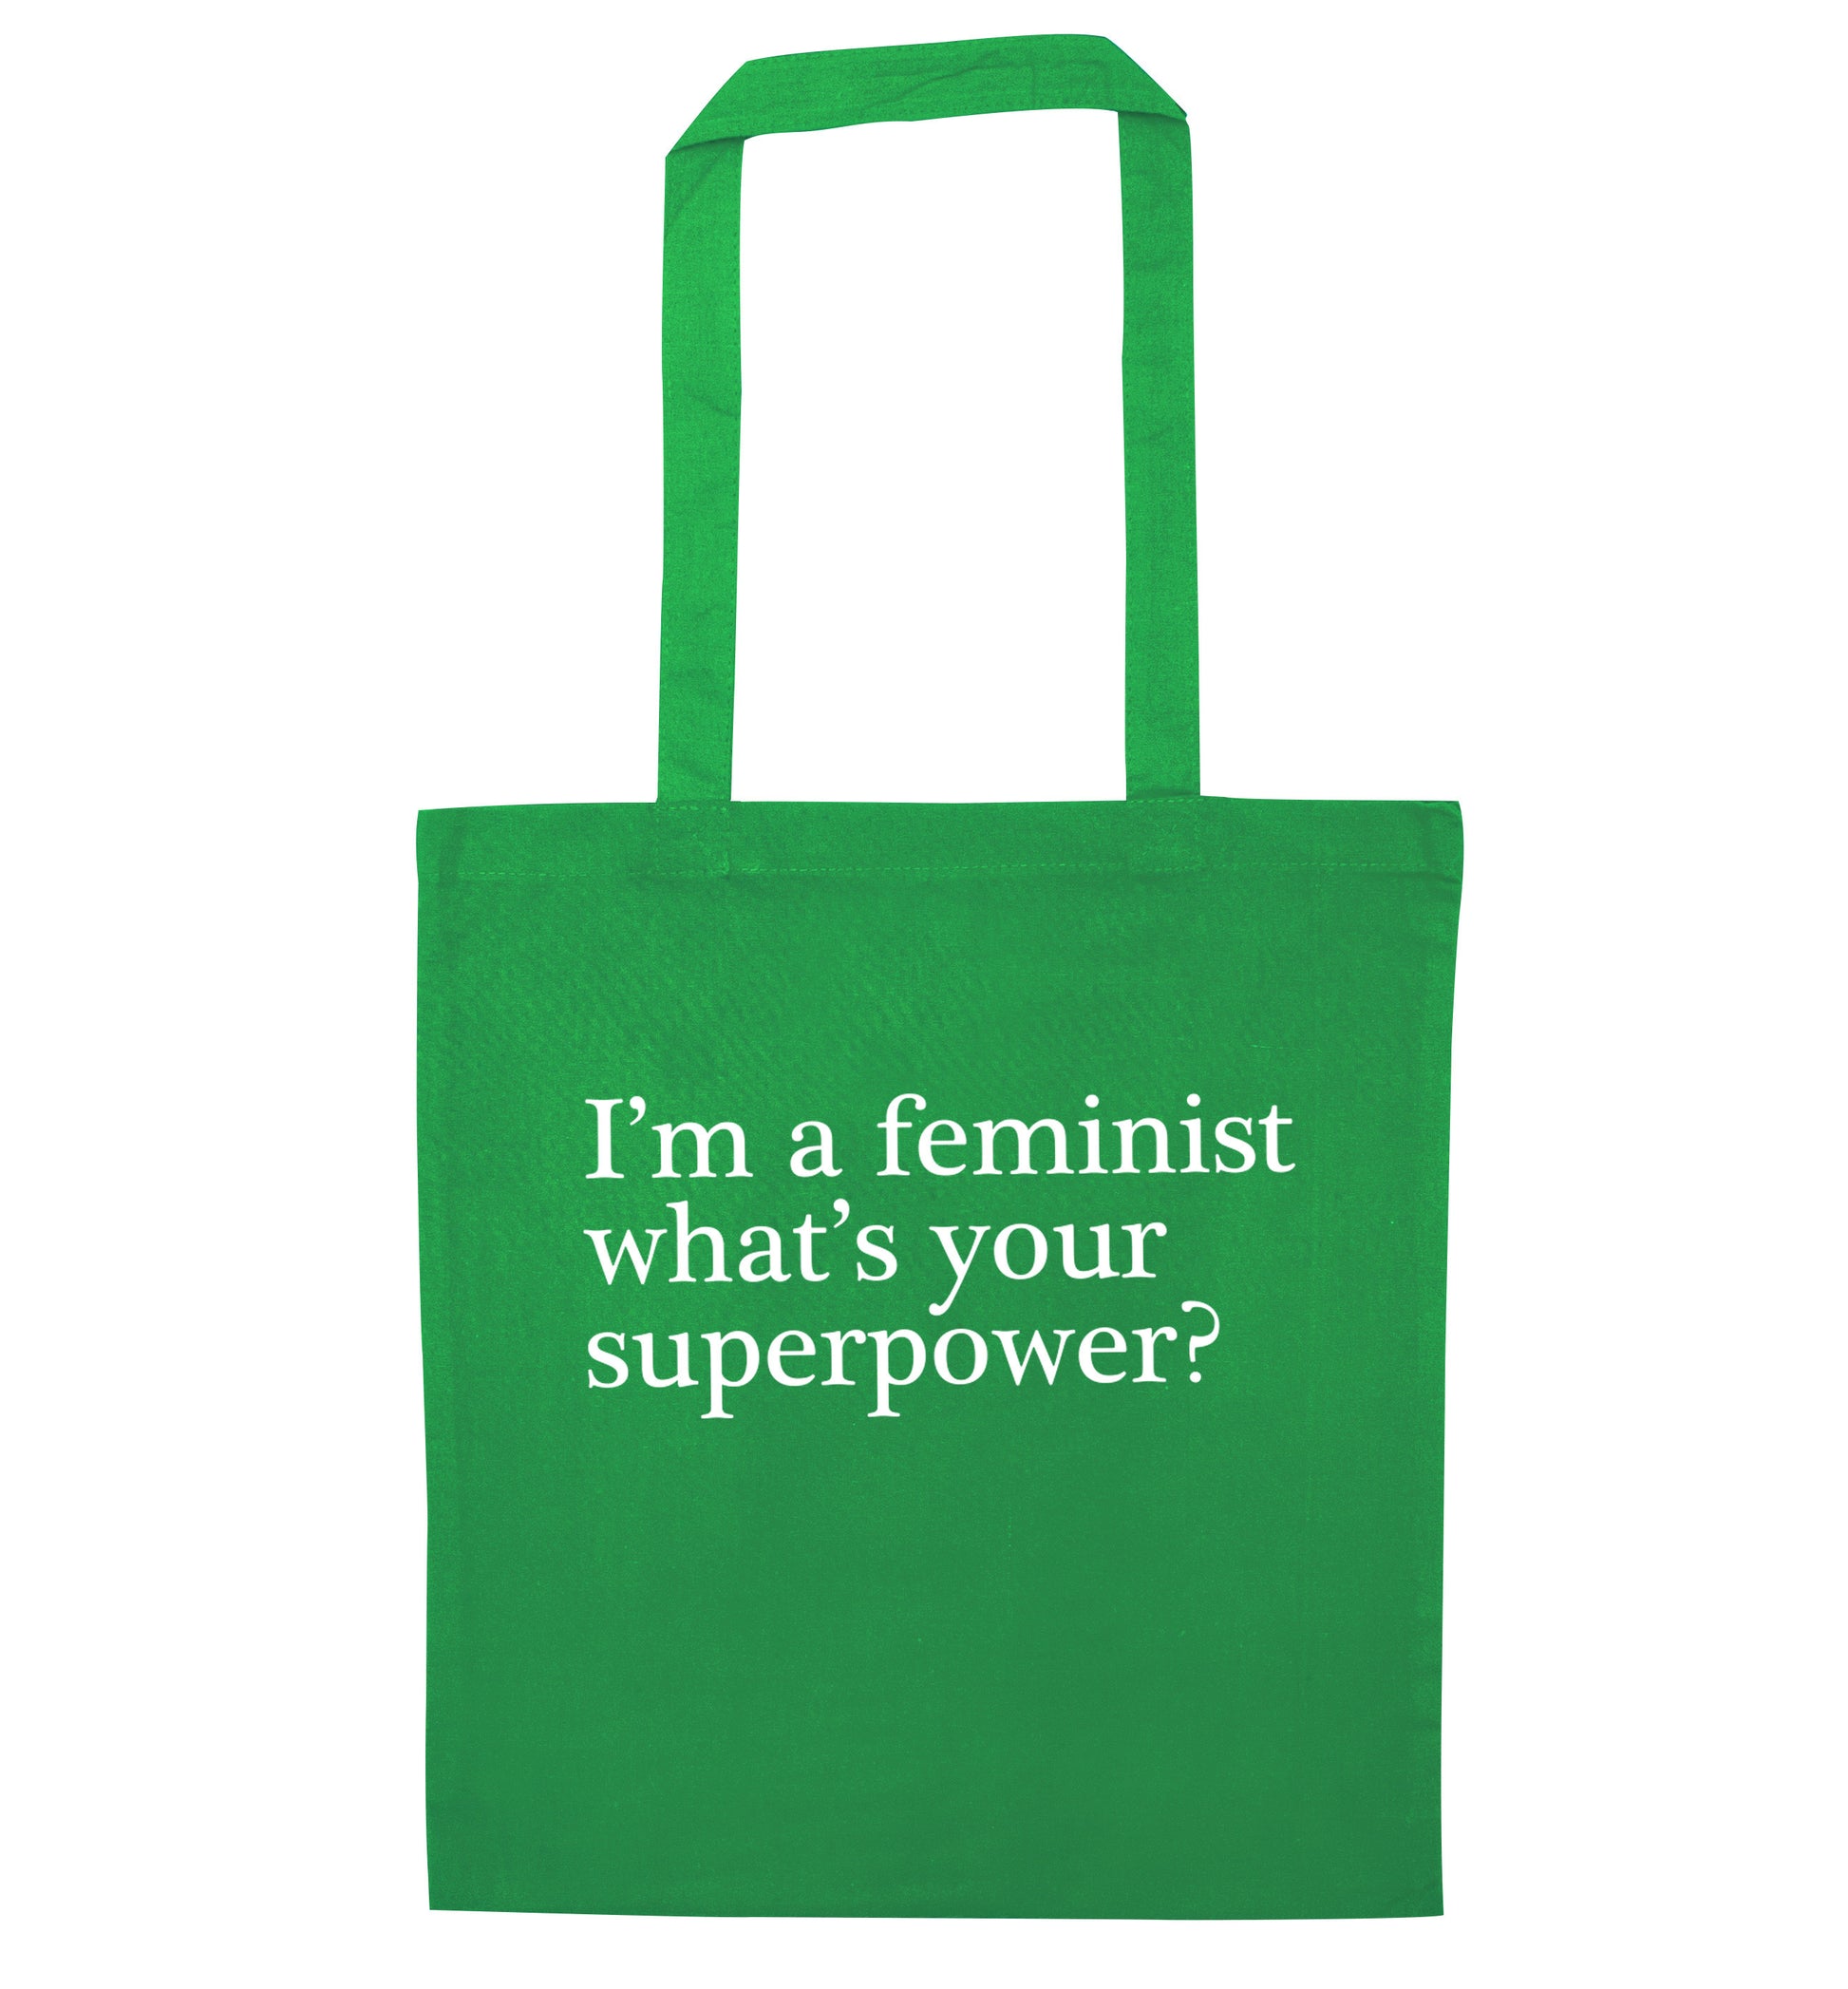 I'm a feminist what's your superpower? green tote bag